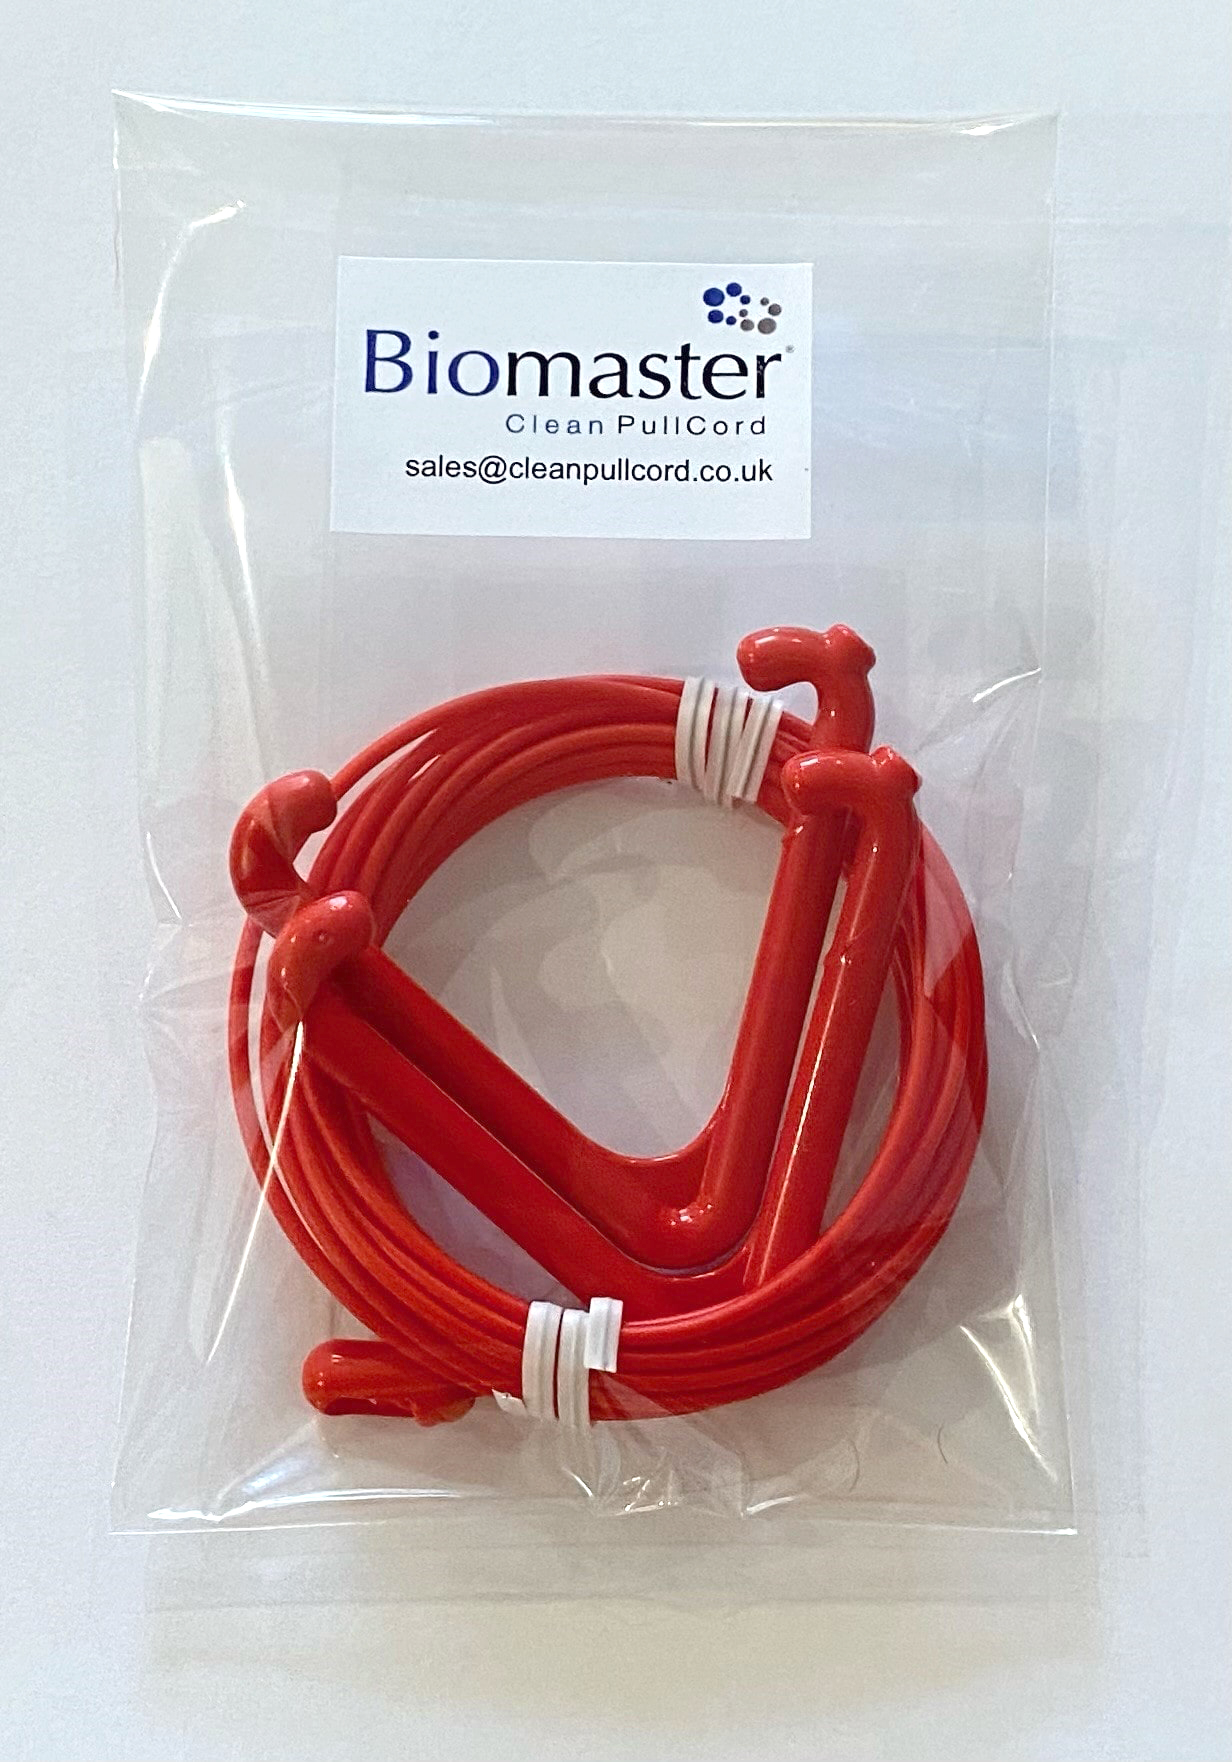 Biomaster Clean Red Pullcord With 2 Handles - 3M - Each